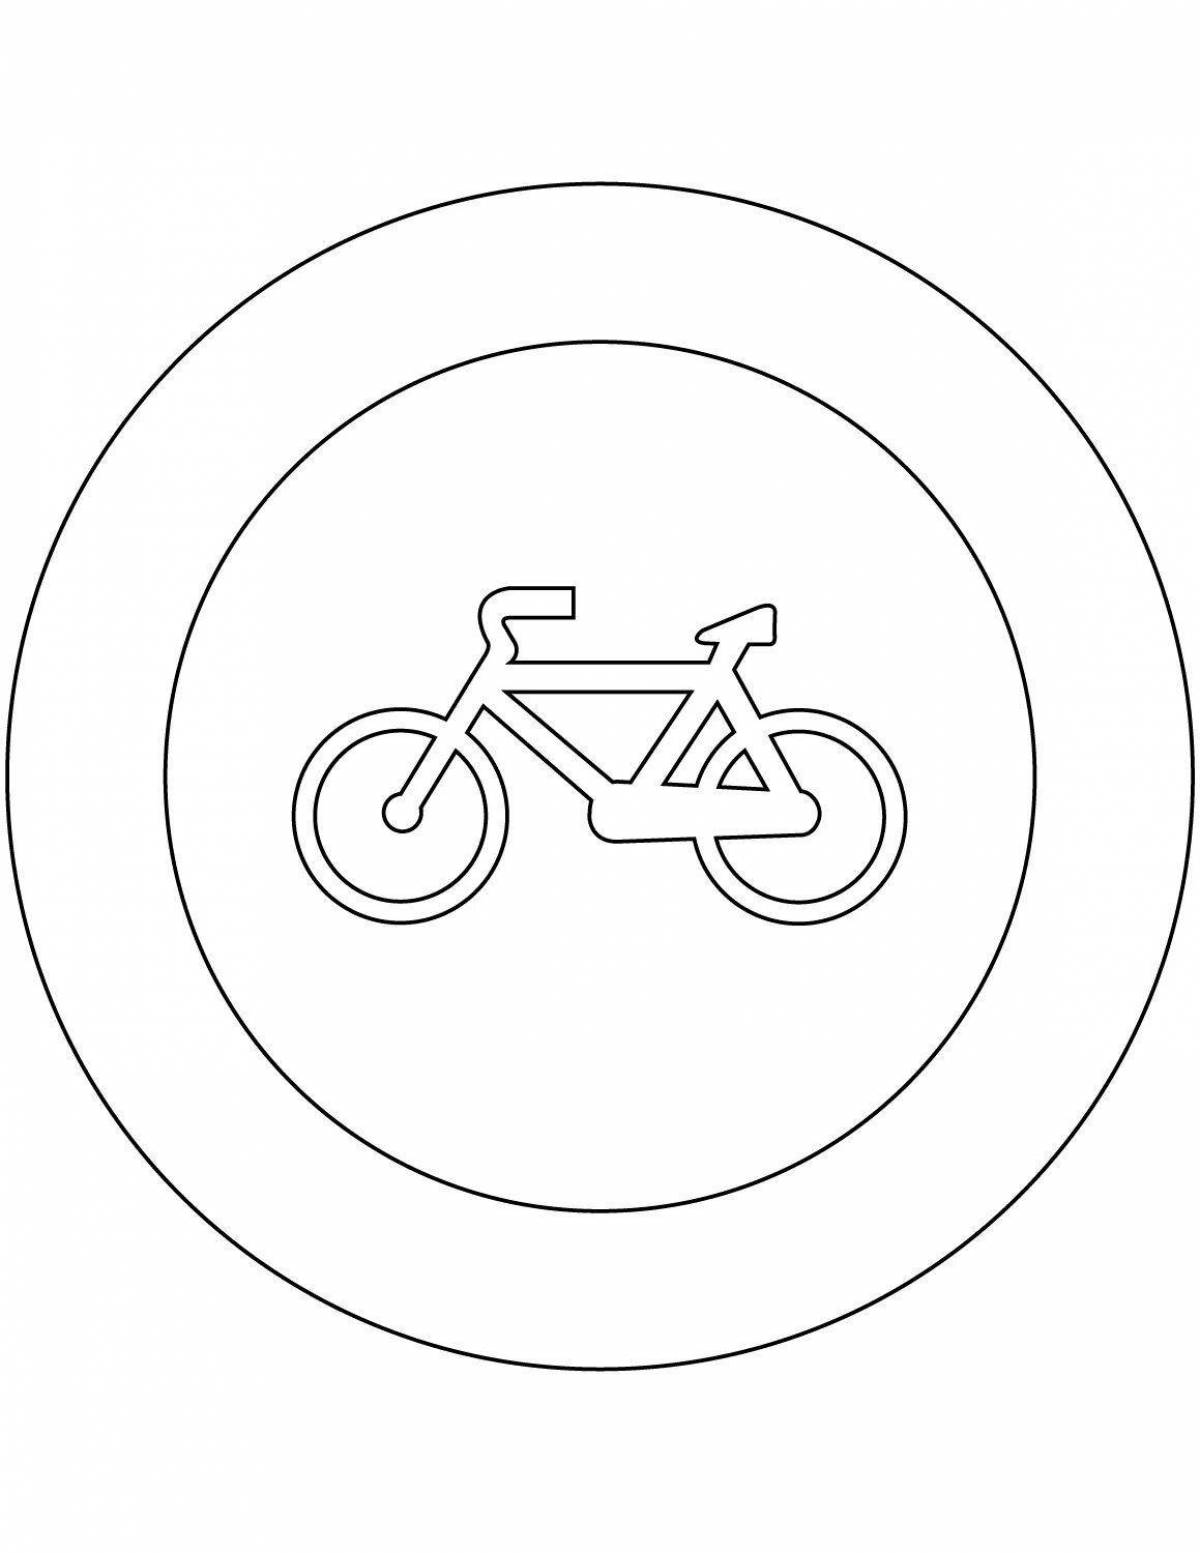 Coloring page for an attractive bike path sign